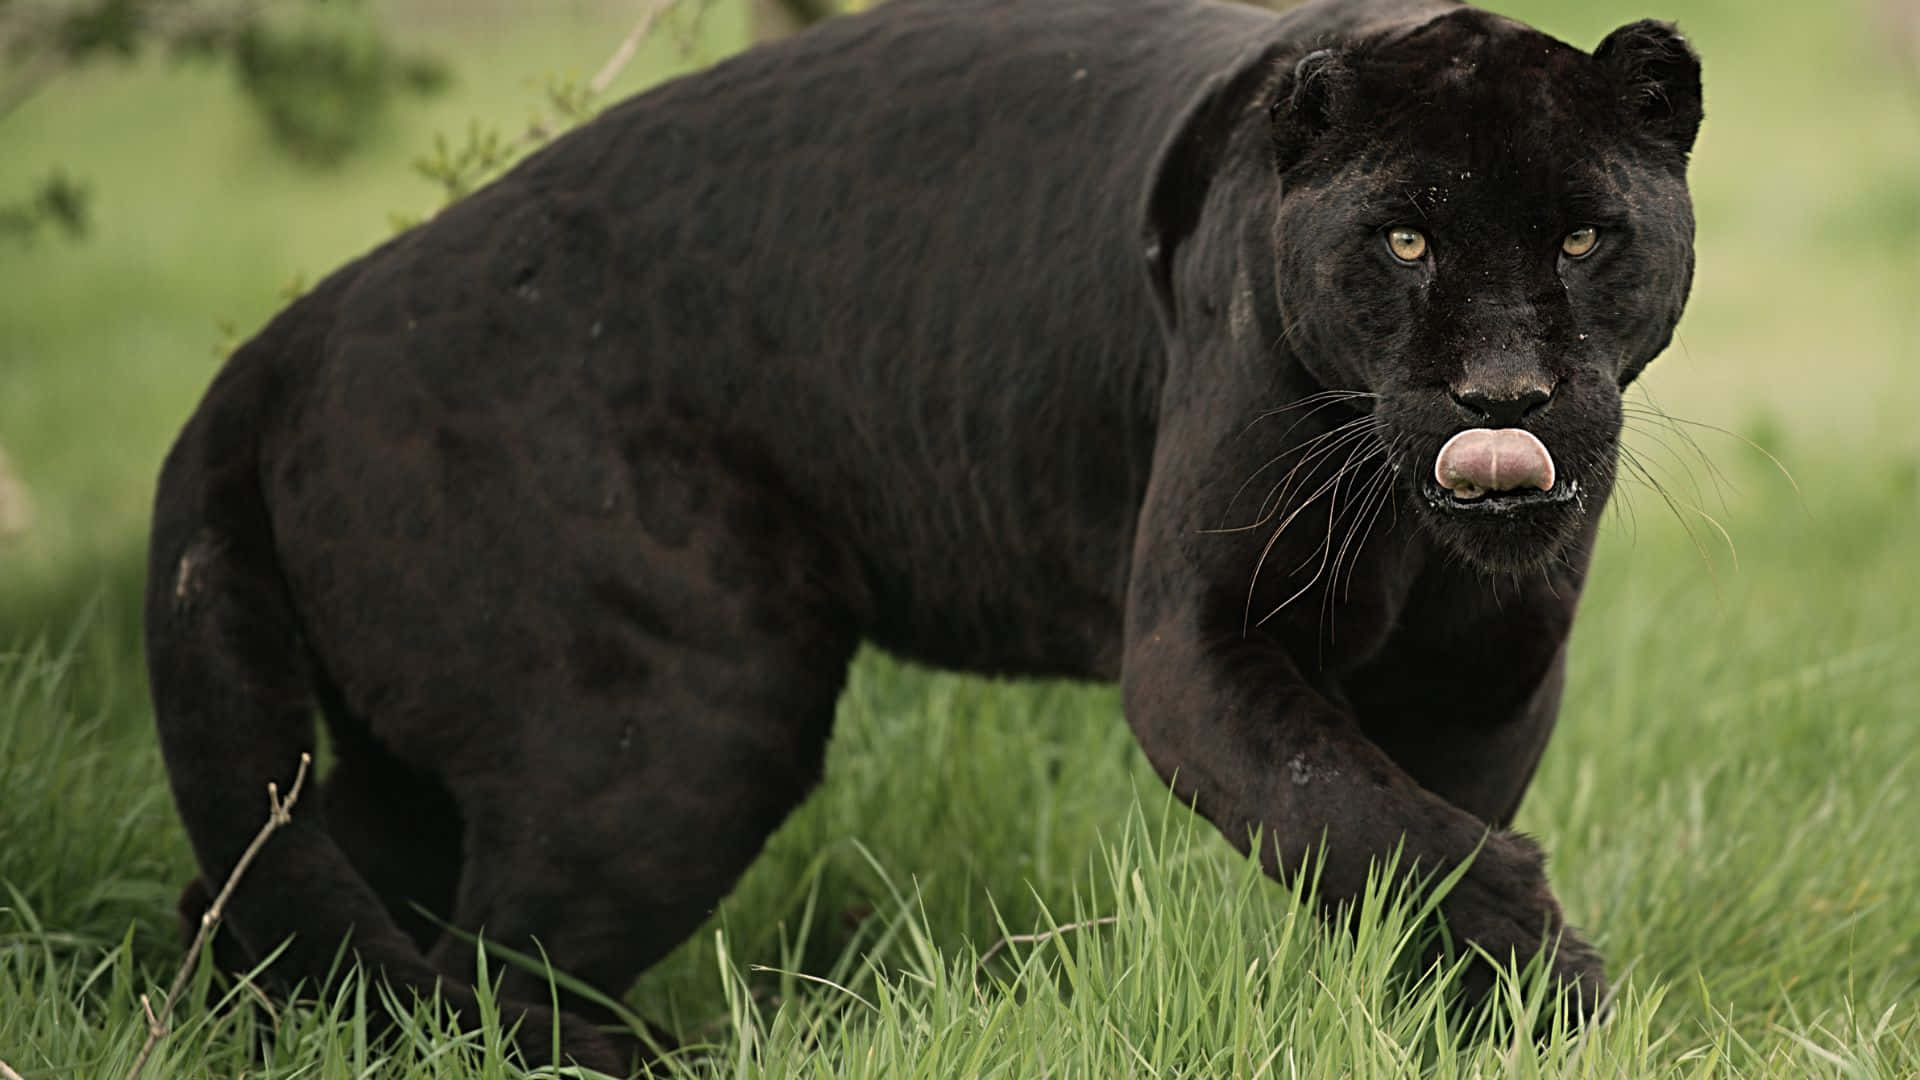 Caption: Majestic Black Panther Stalking in the Wild